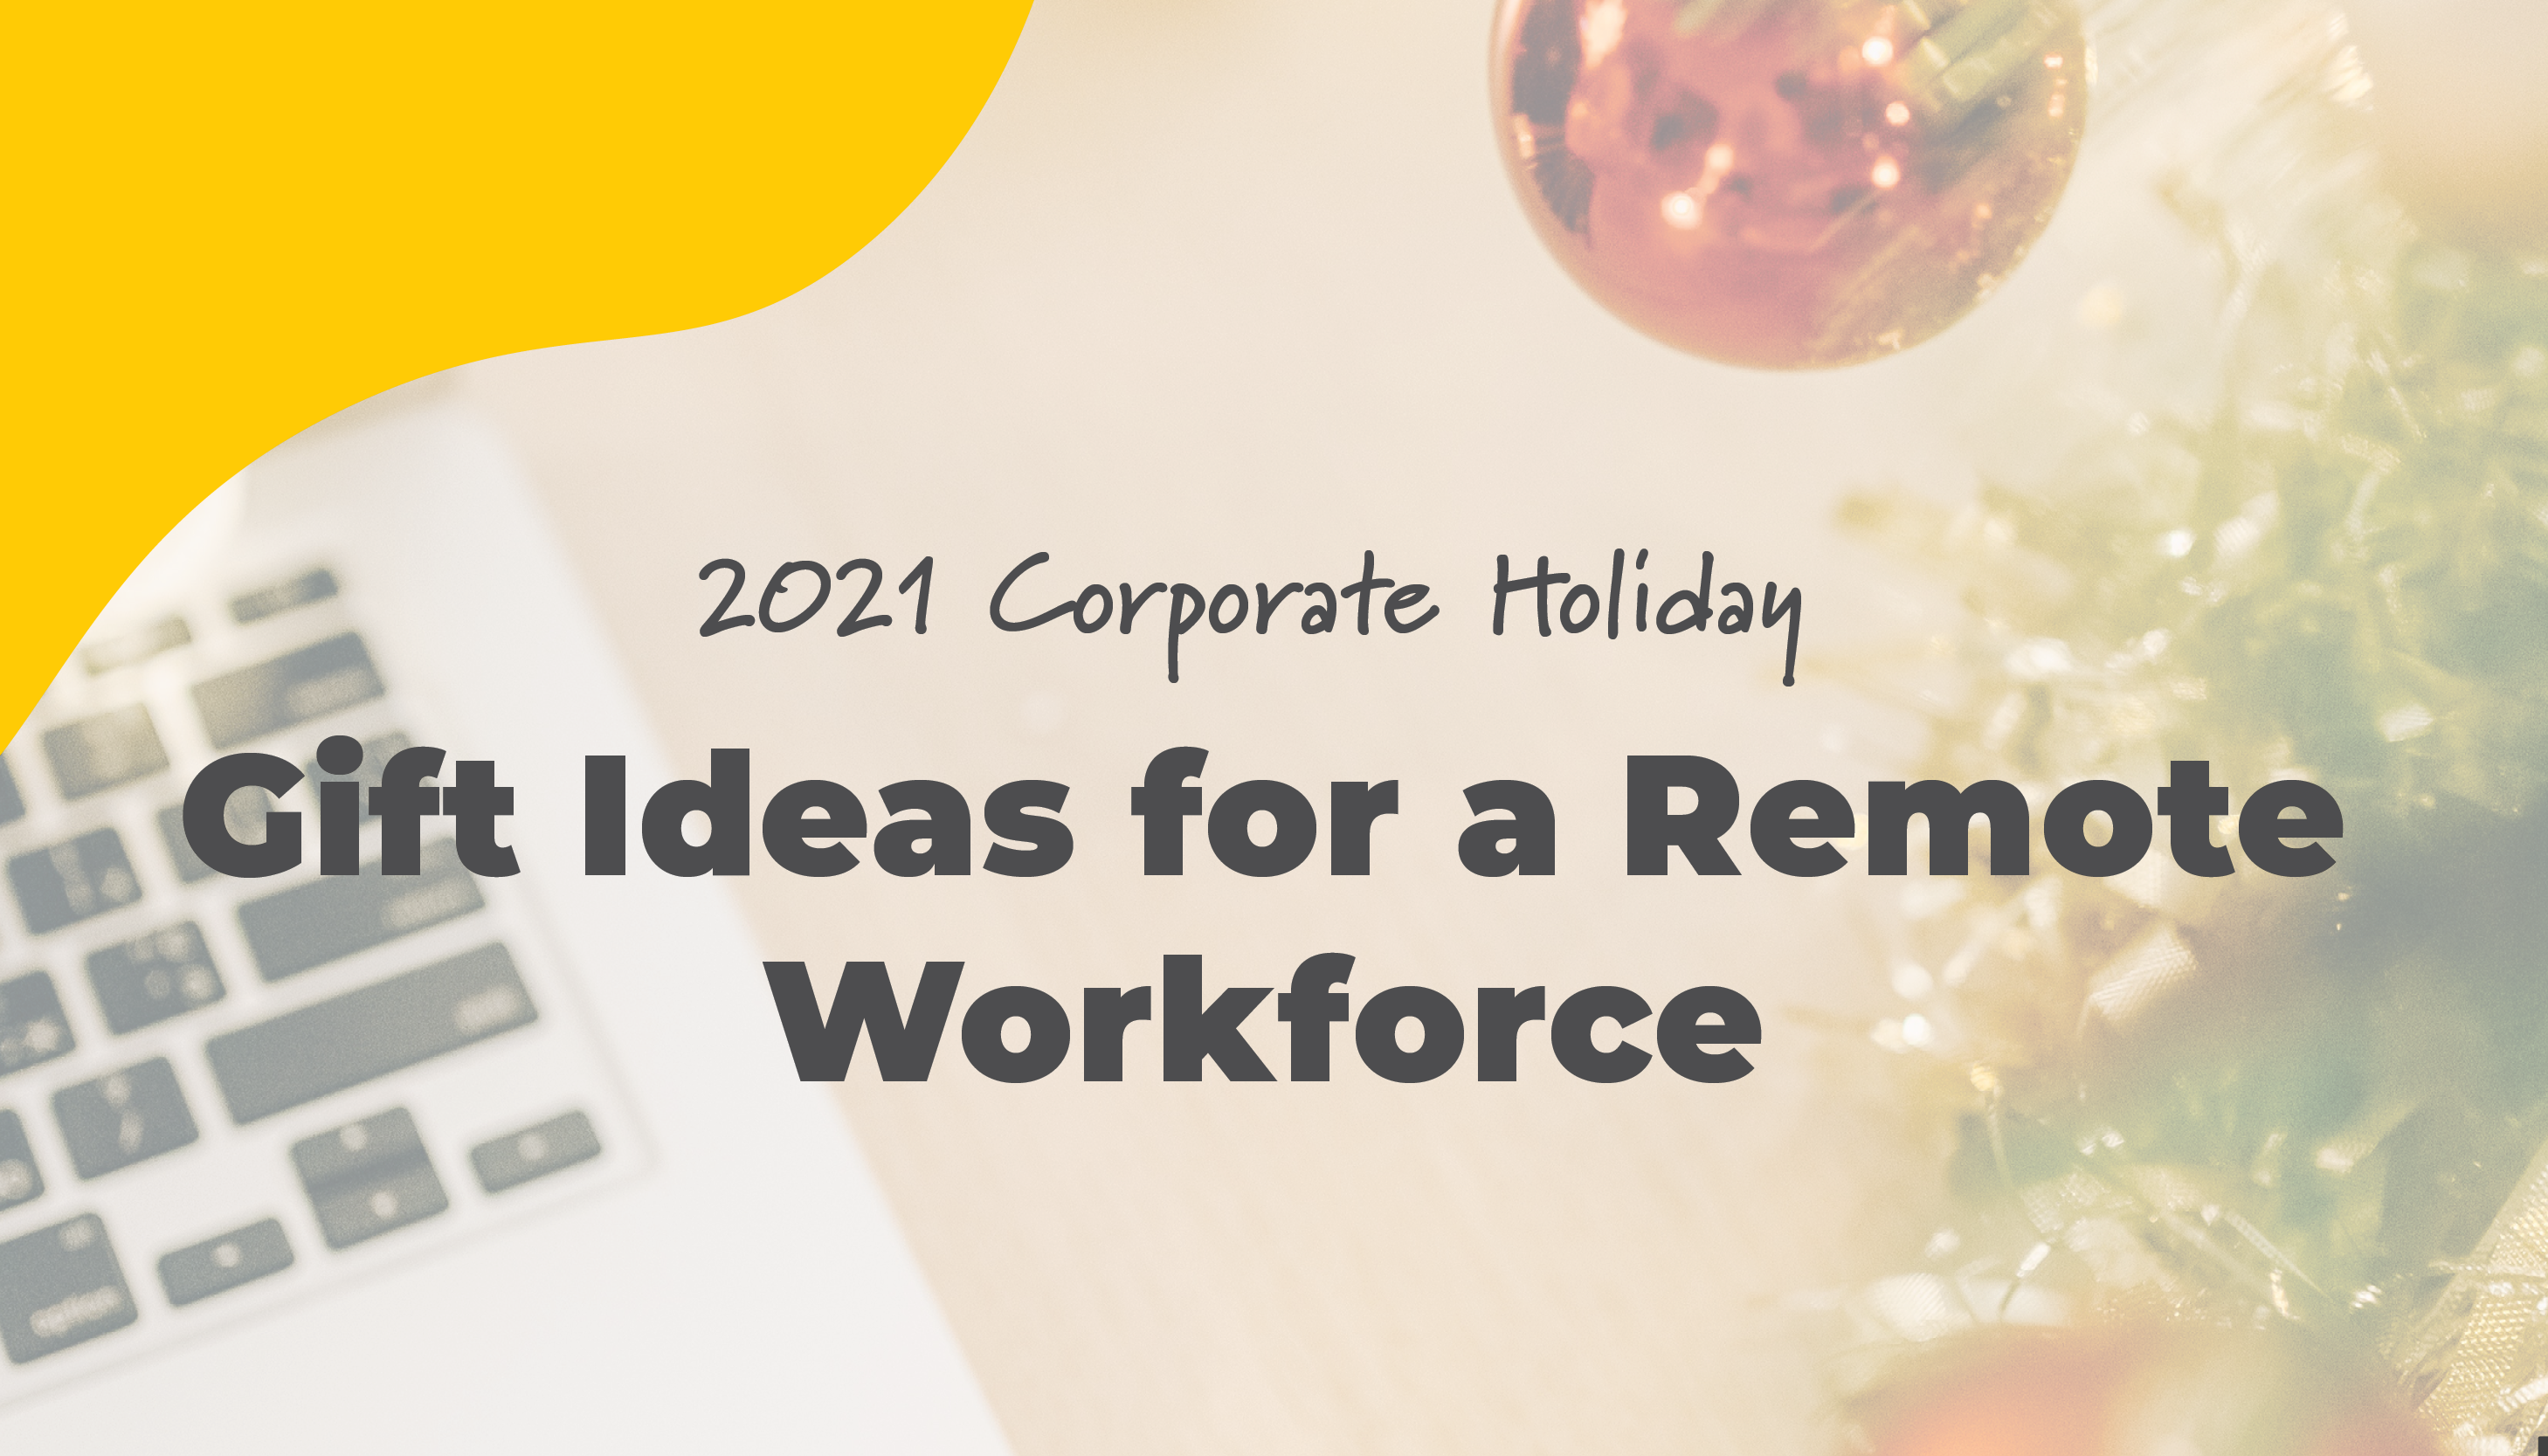 2021 Corporate Holiday Gift Ideas for a Remote Workforce | Benefits by Design